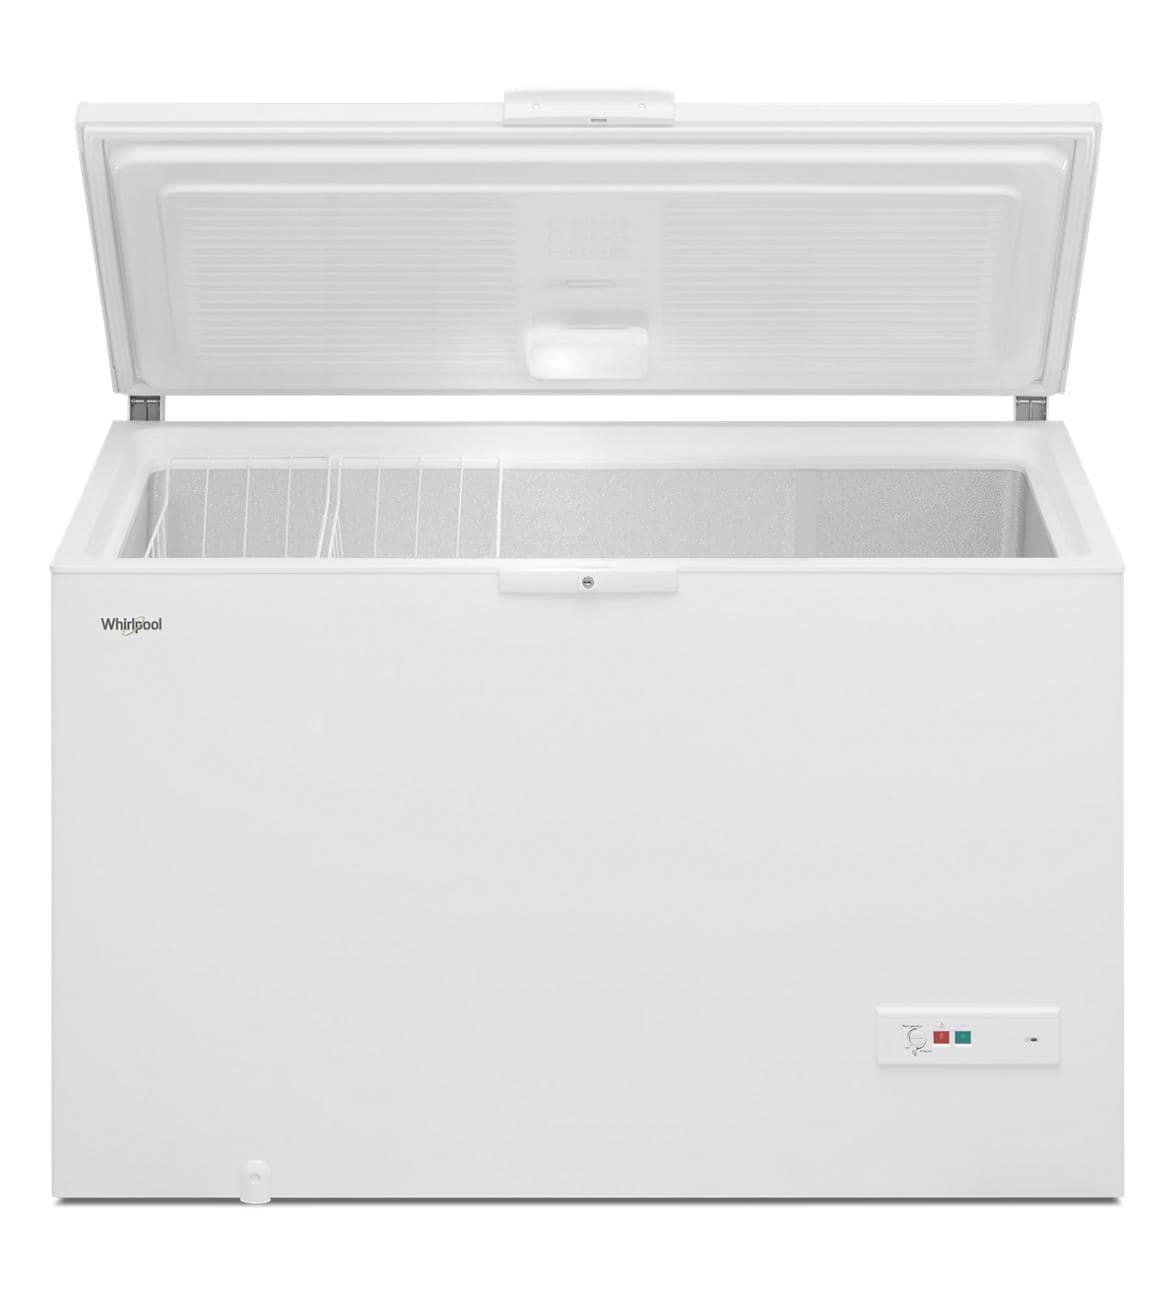 Best 5 Cubic Foot Ge Chest Freezer - In Modesto for sale in Turlock,  California for 2024